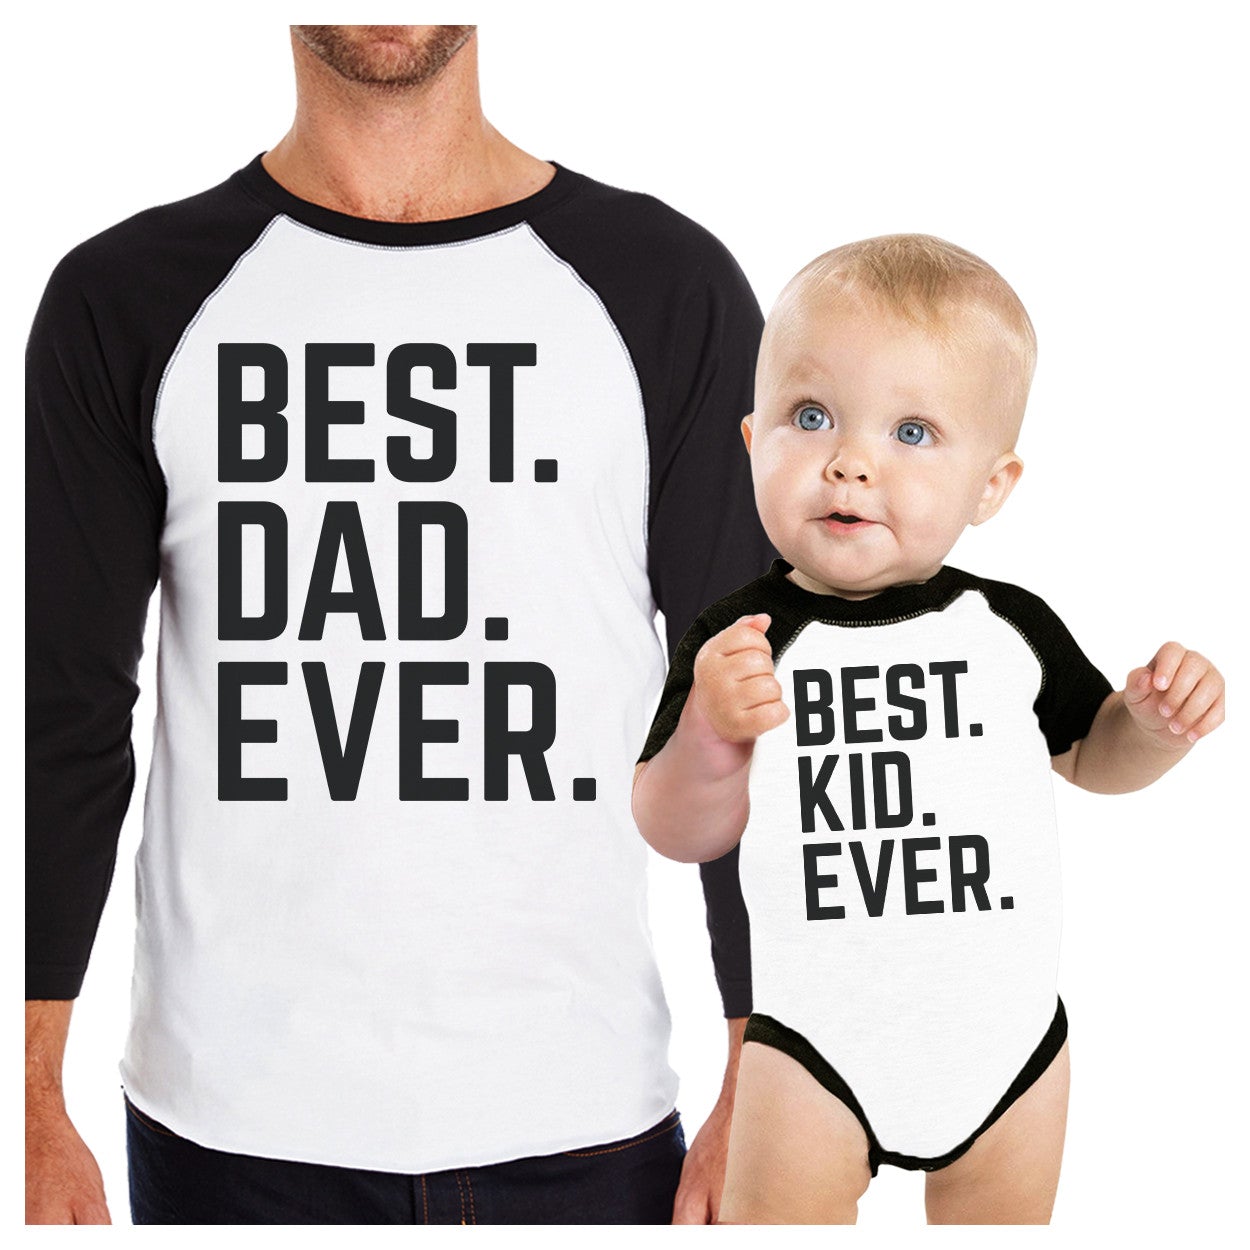 Best Dad and Kid Ever Baseball Tee Unique Family T-shirts Ideas - 2X-Large / 6M Bodysuit